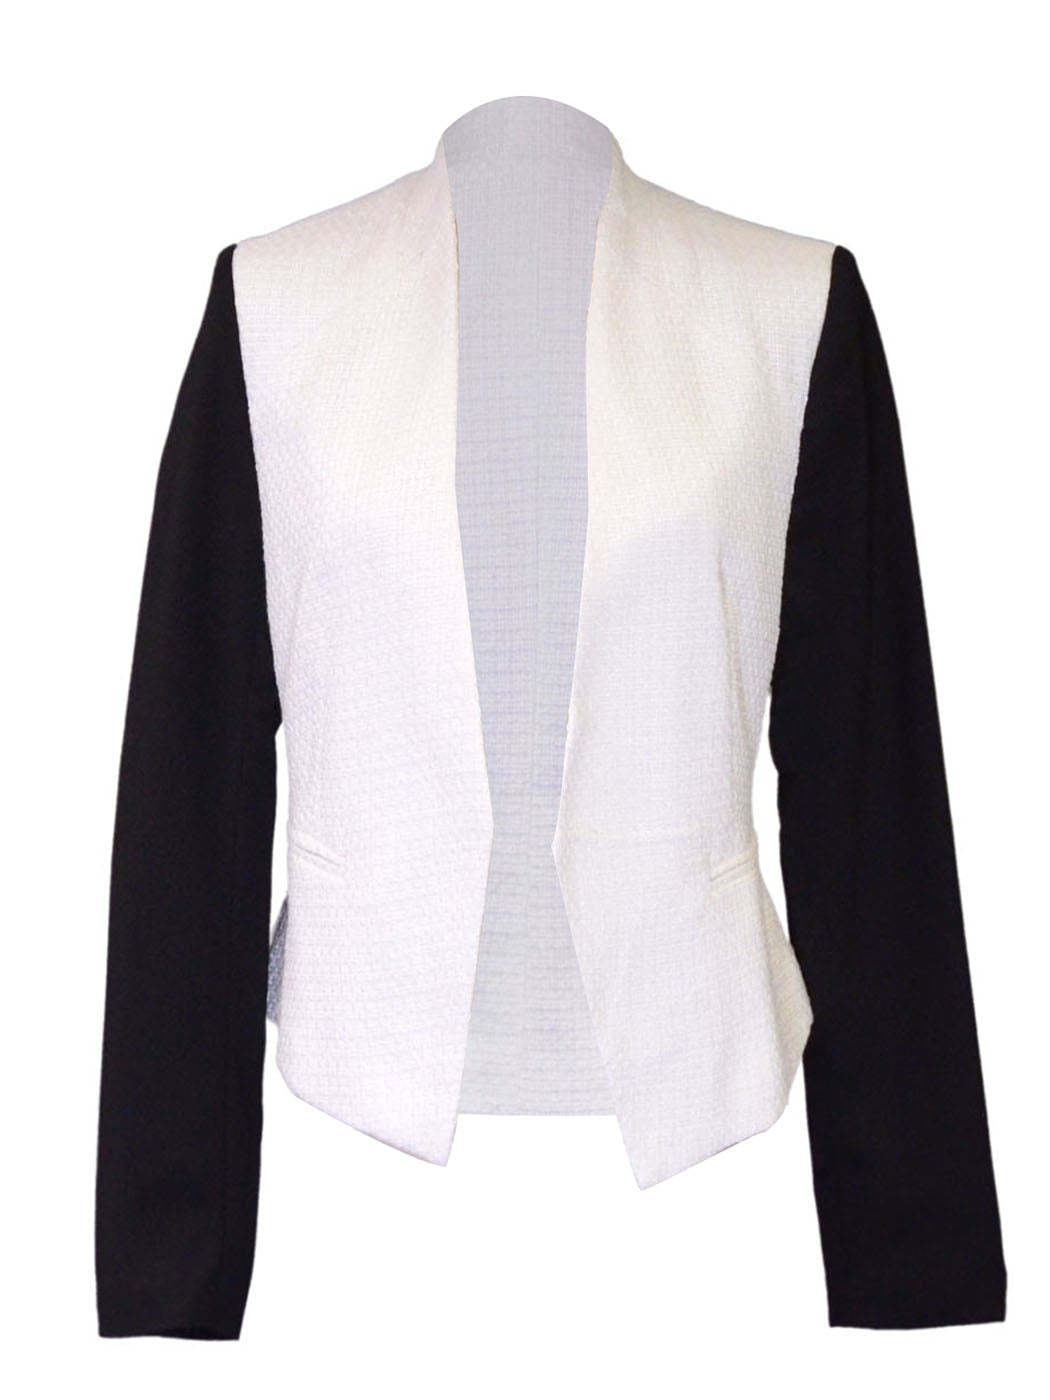 Everly Contrast Heavyweight Black And White Tweed Fabric Blazer With Pockets - ALILANG.COM